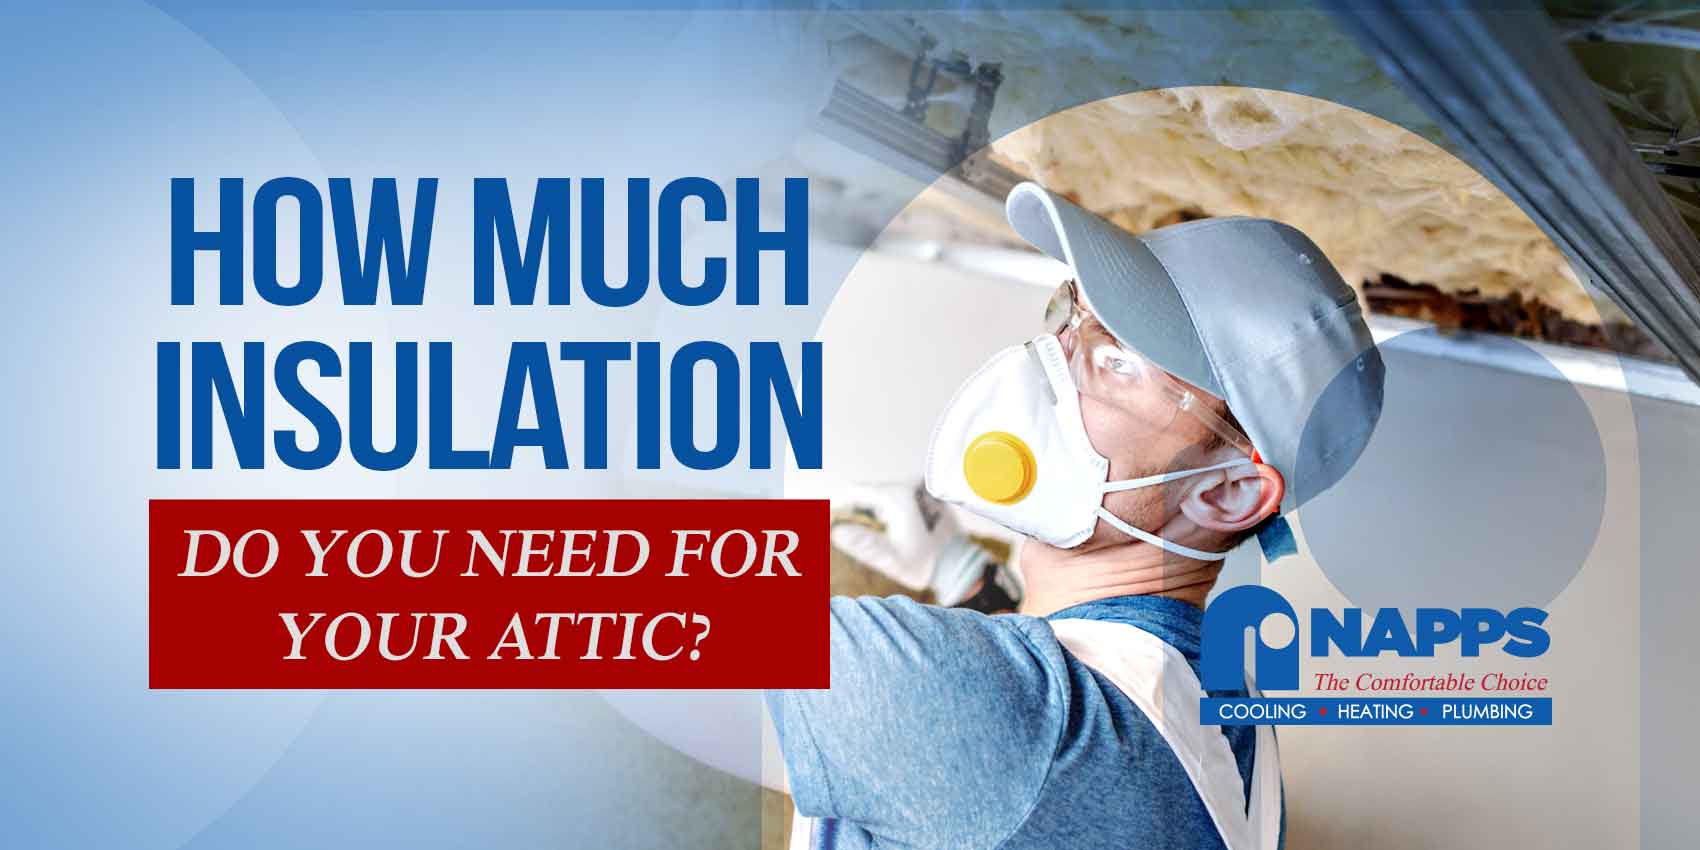 How Much Insulation Do You Need for Your Attic?